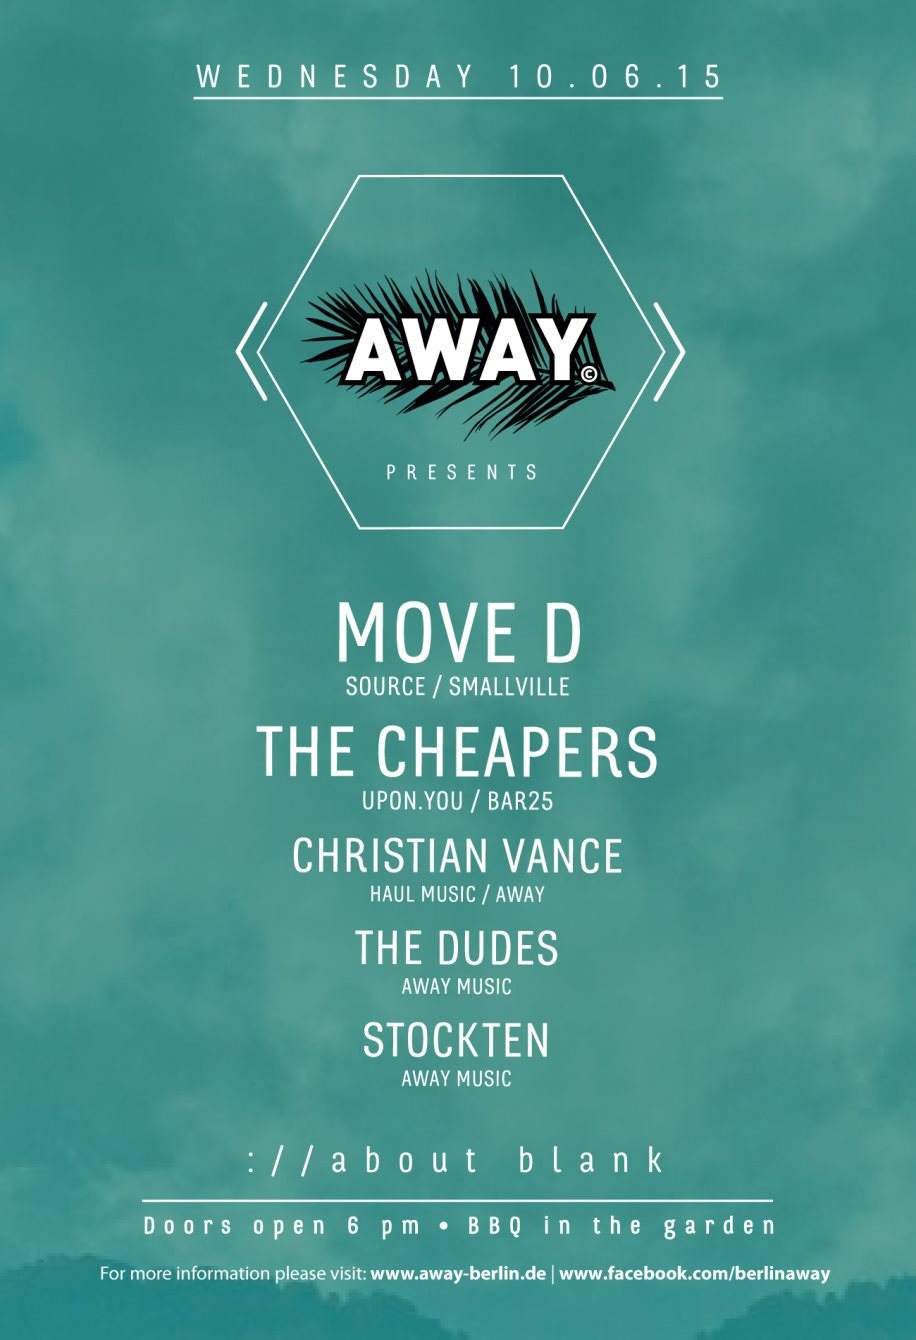 Away presents Move D & The Cheapers - フライヤー裏